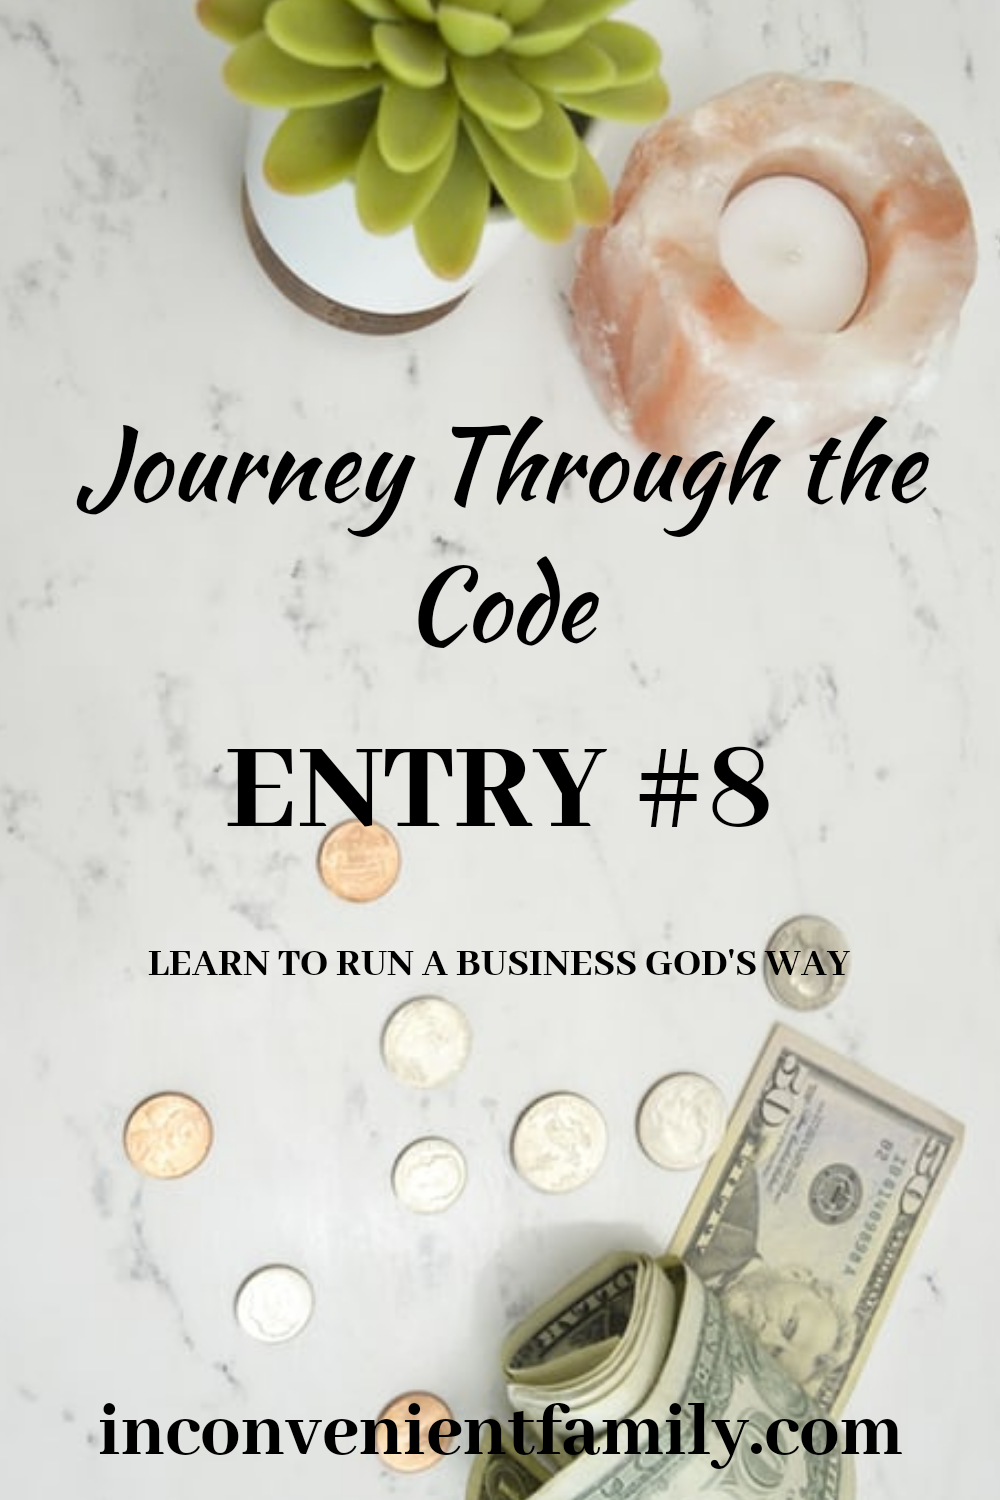 The Kingdom Code Journal Entry